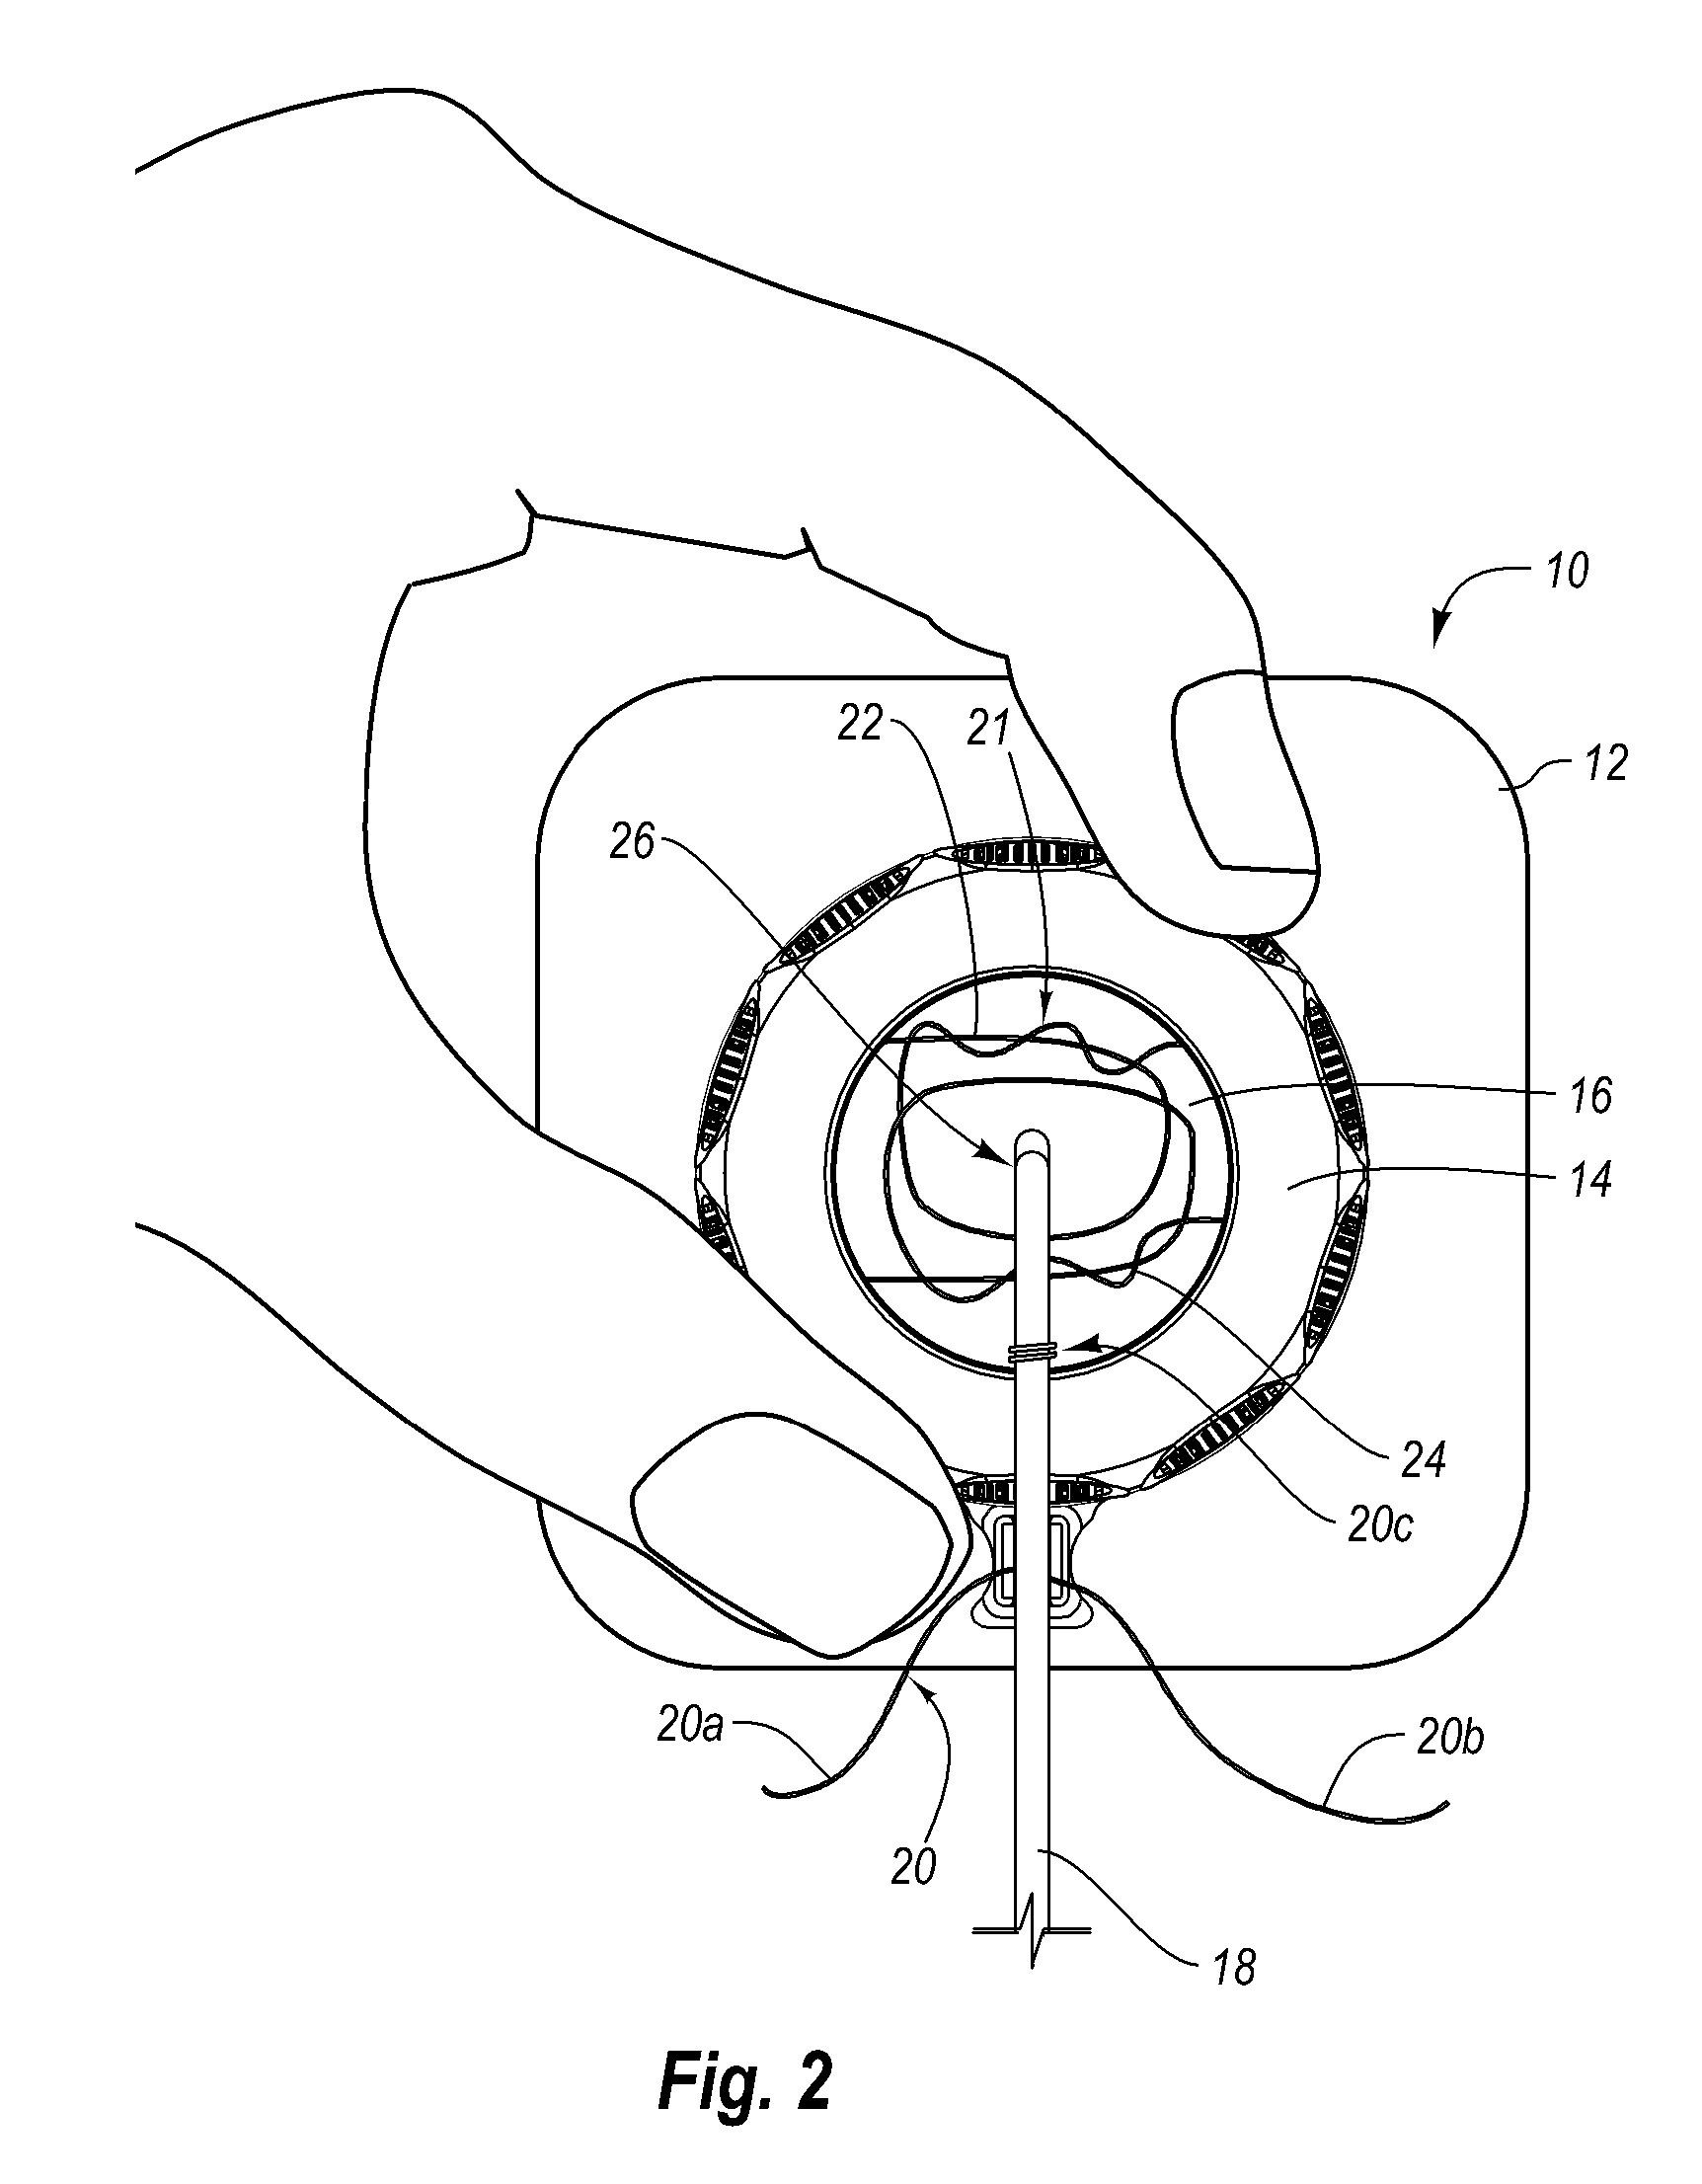 Self-suturing anchor device